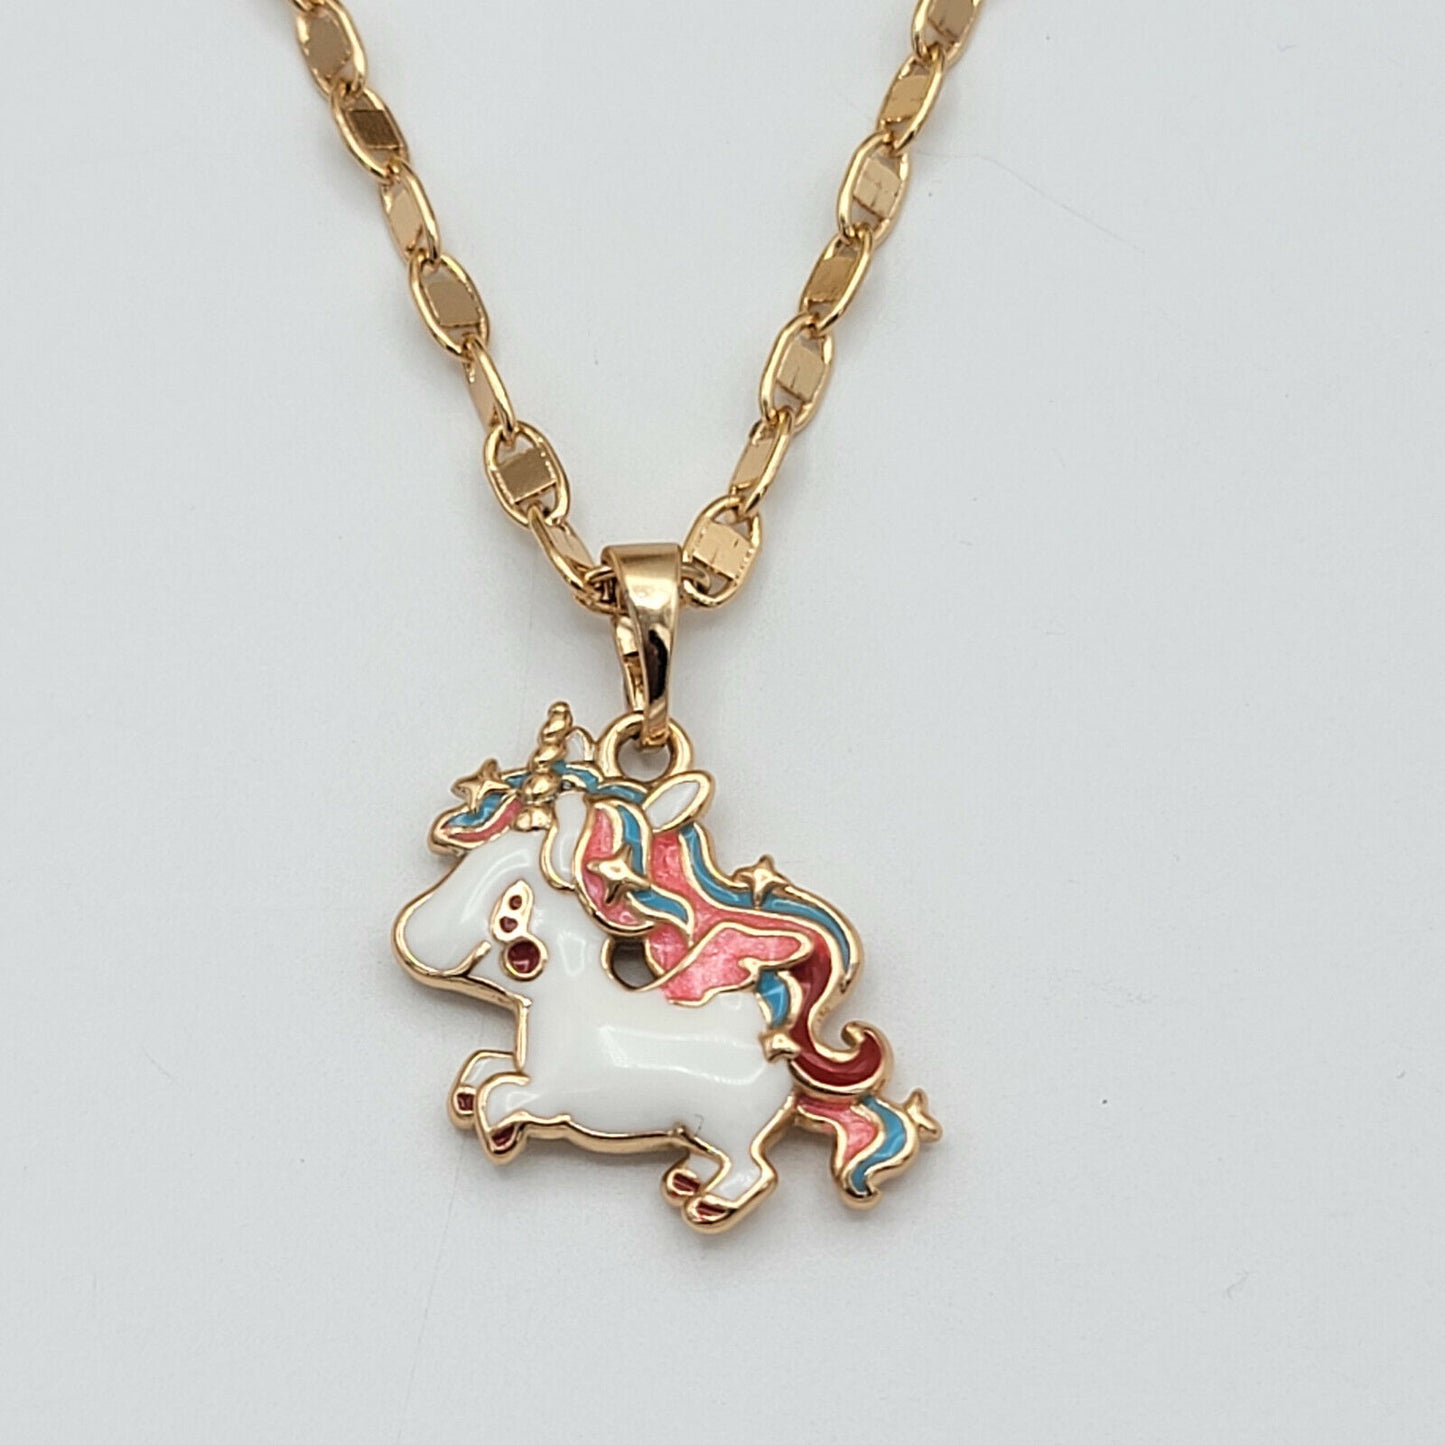 Necklaces - 18K Gold Plated. Unicorn Pendant & Chain.